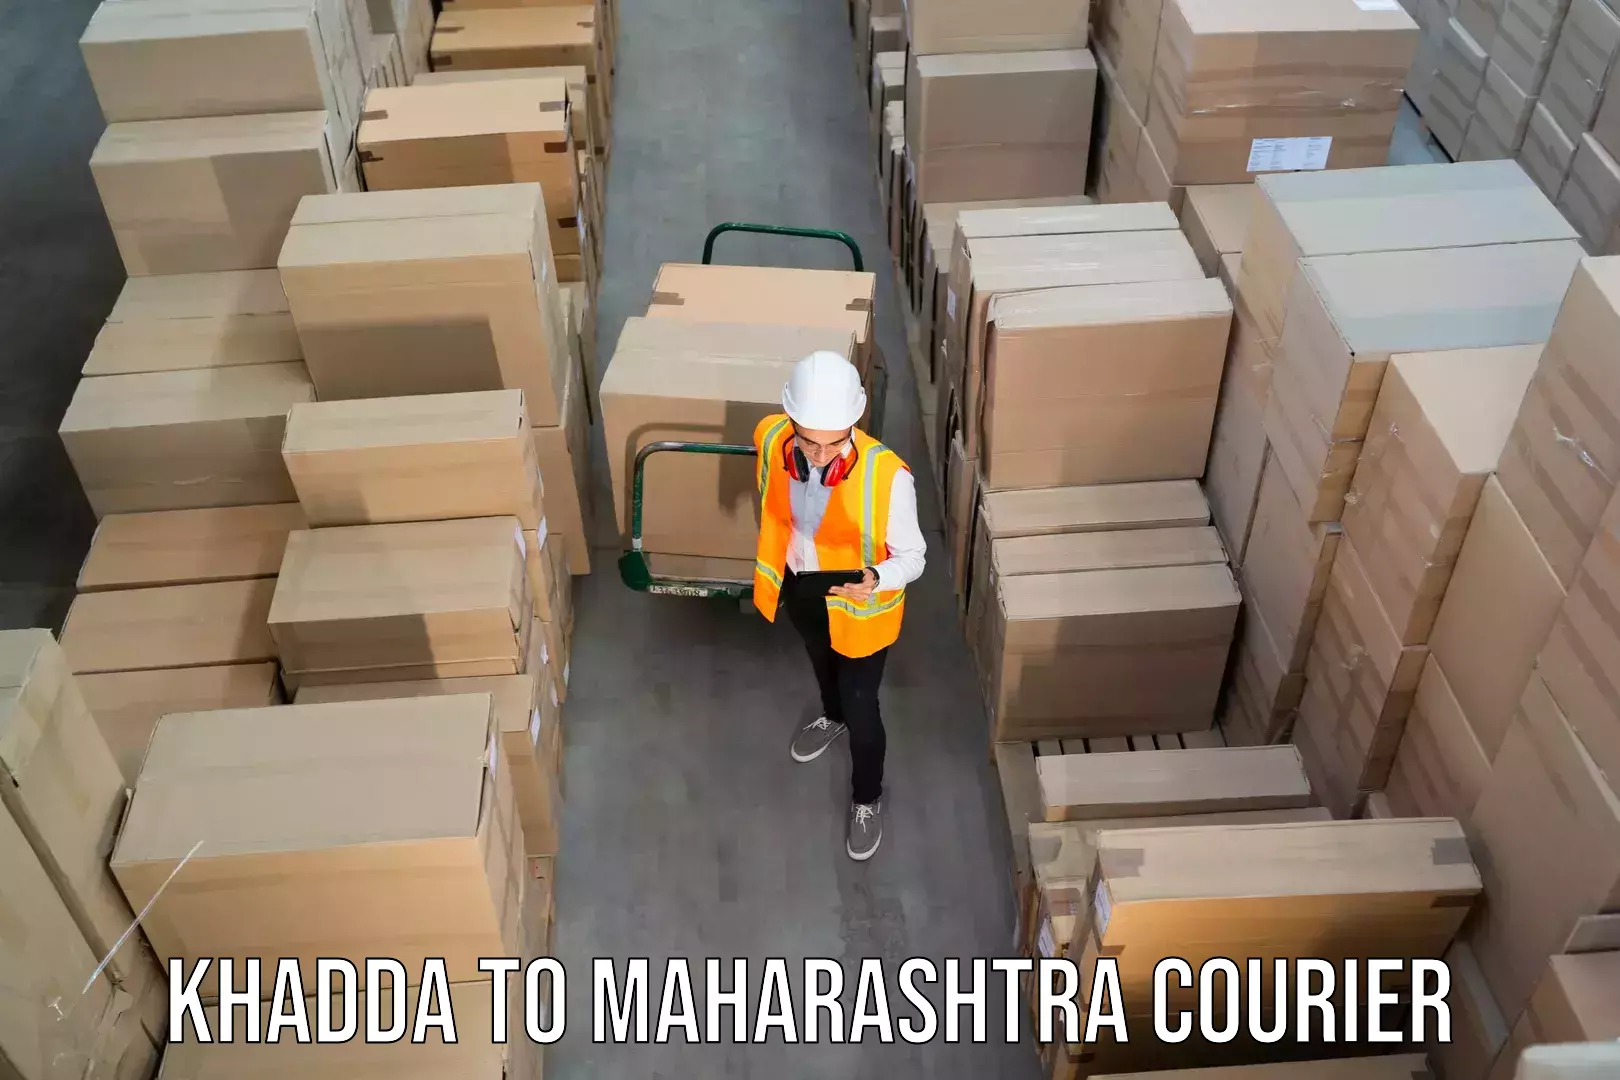 Round-the-clock parcel delivery Khadda to Pune